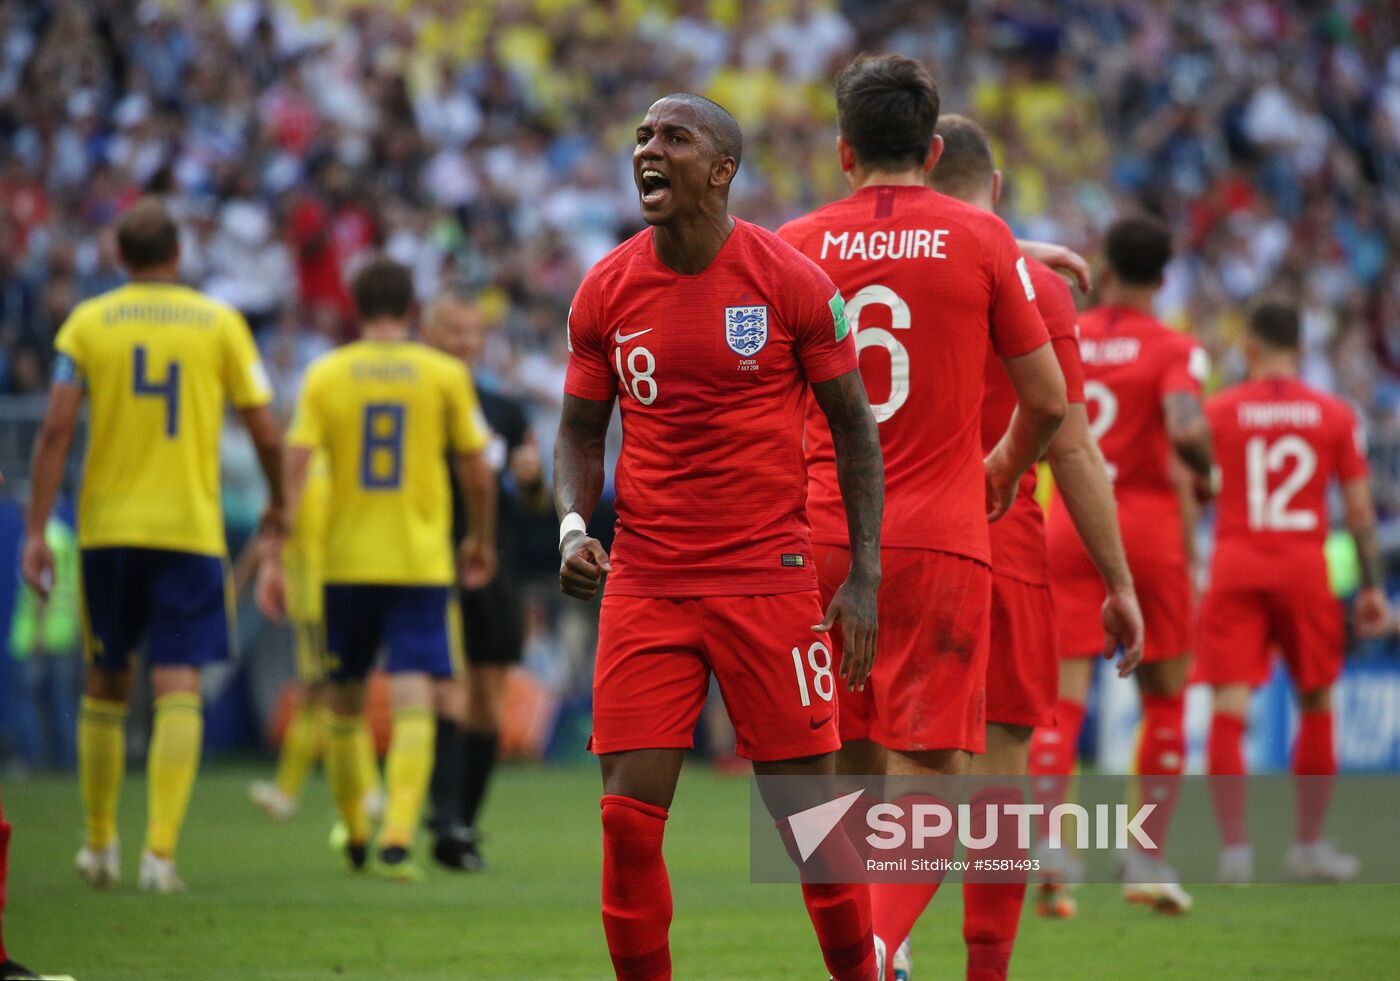 Russia World Cup Sweden - England